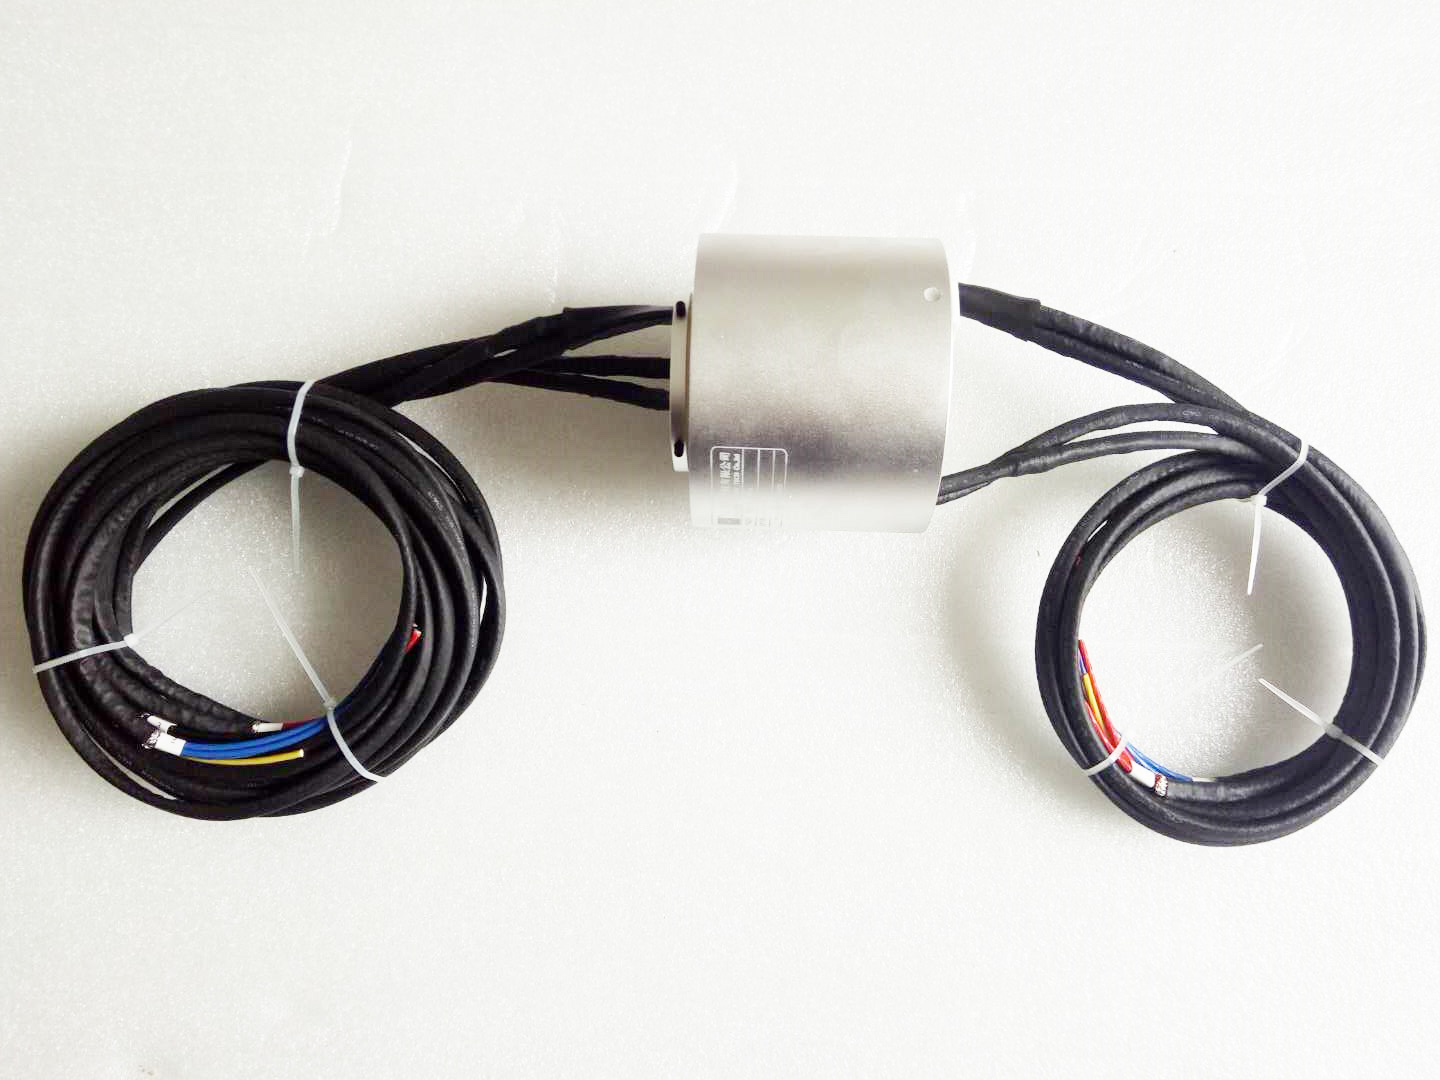 electrical slip ring DHK050-5-50A (3.1kg)